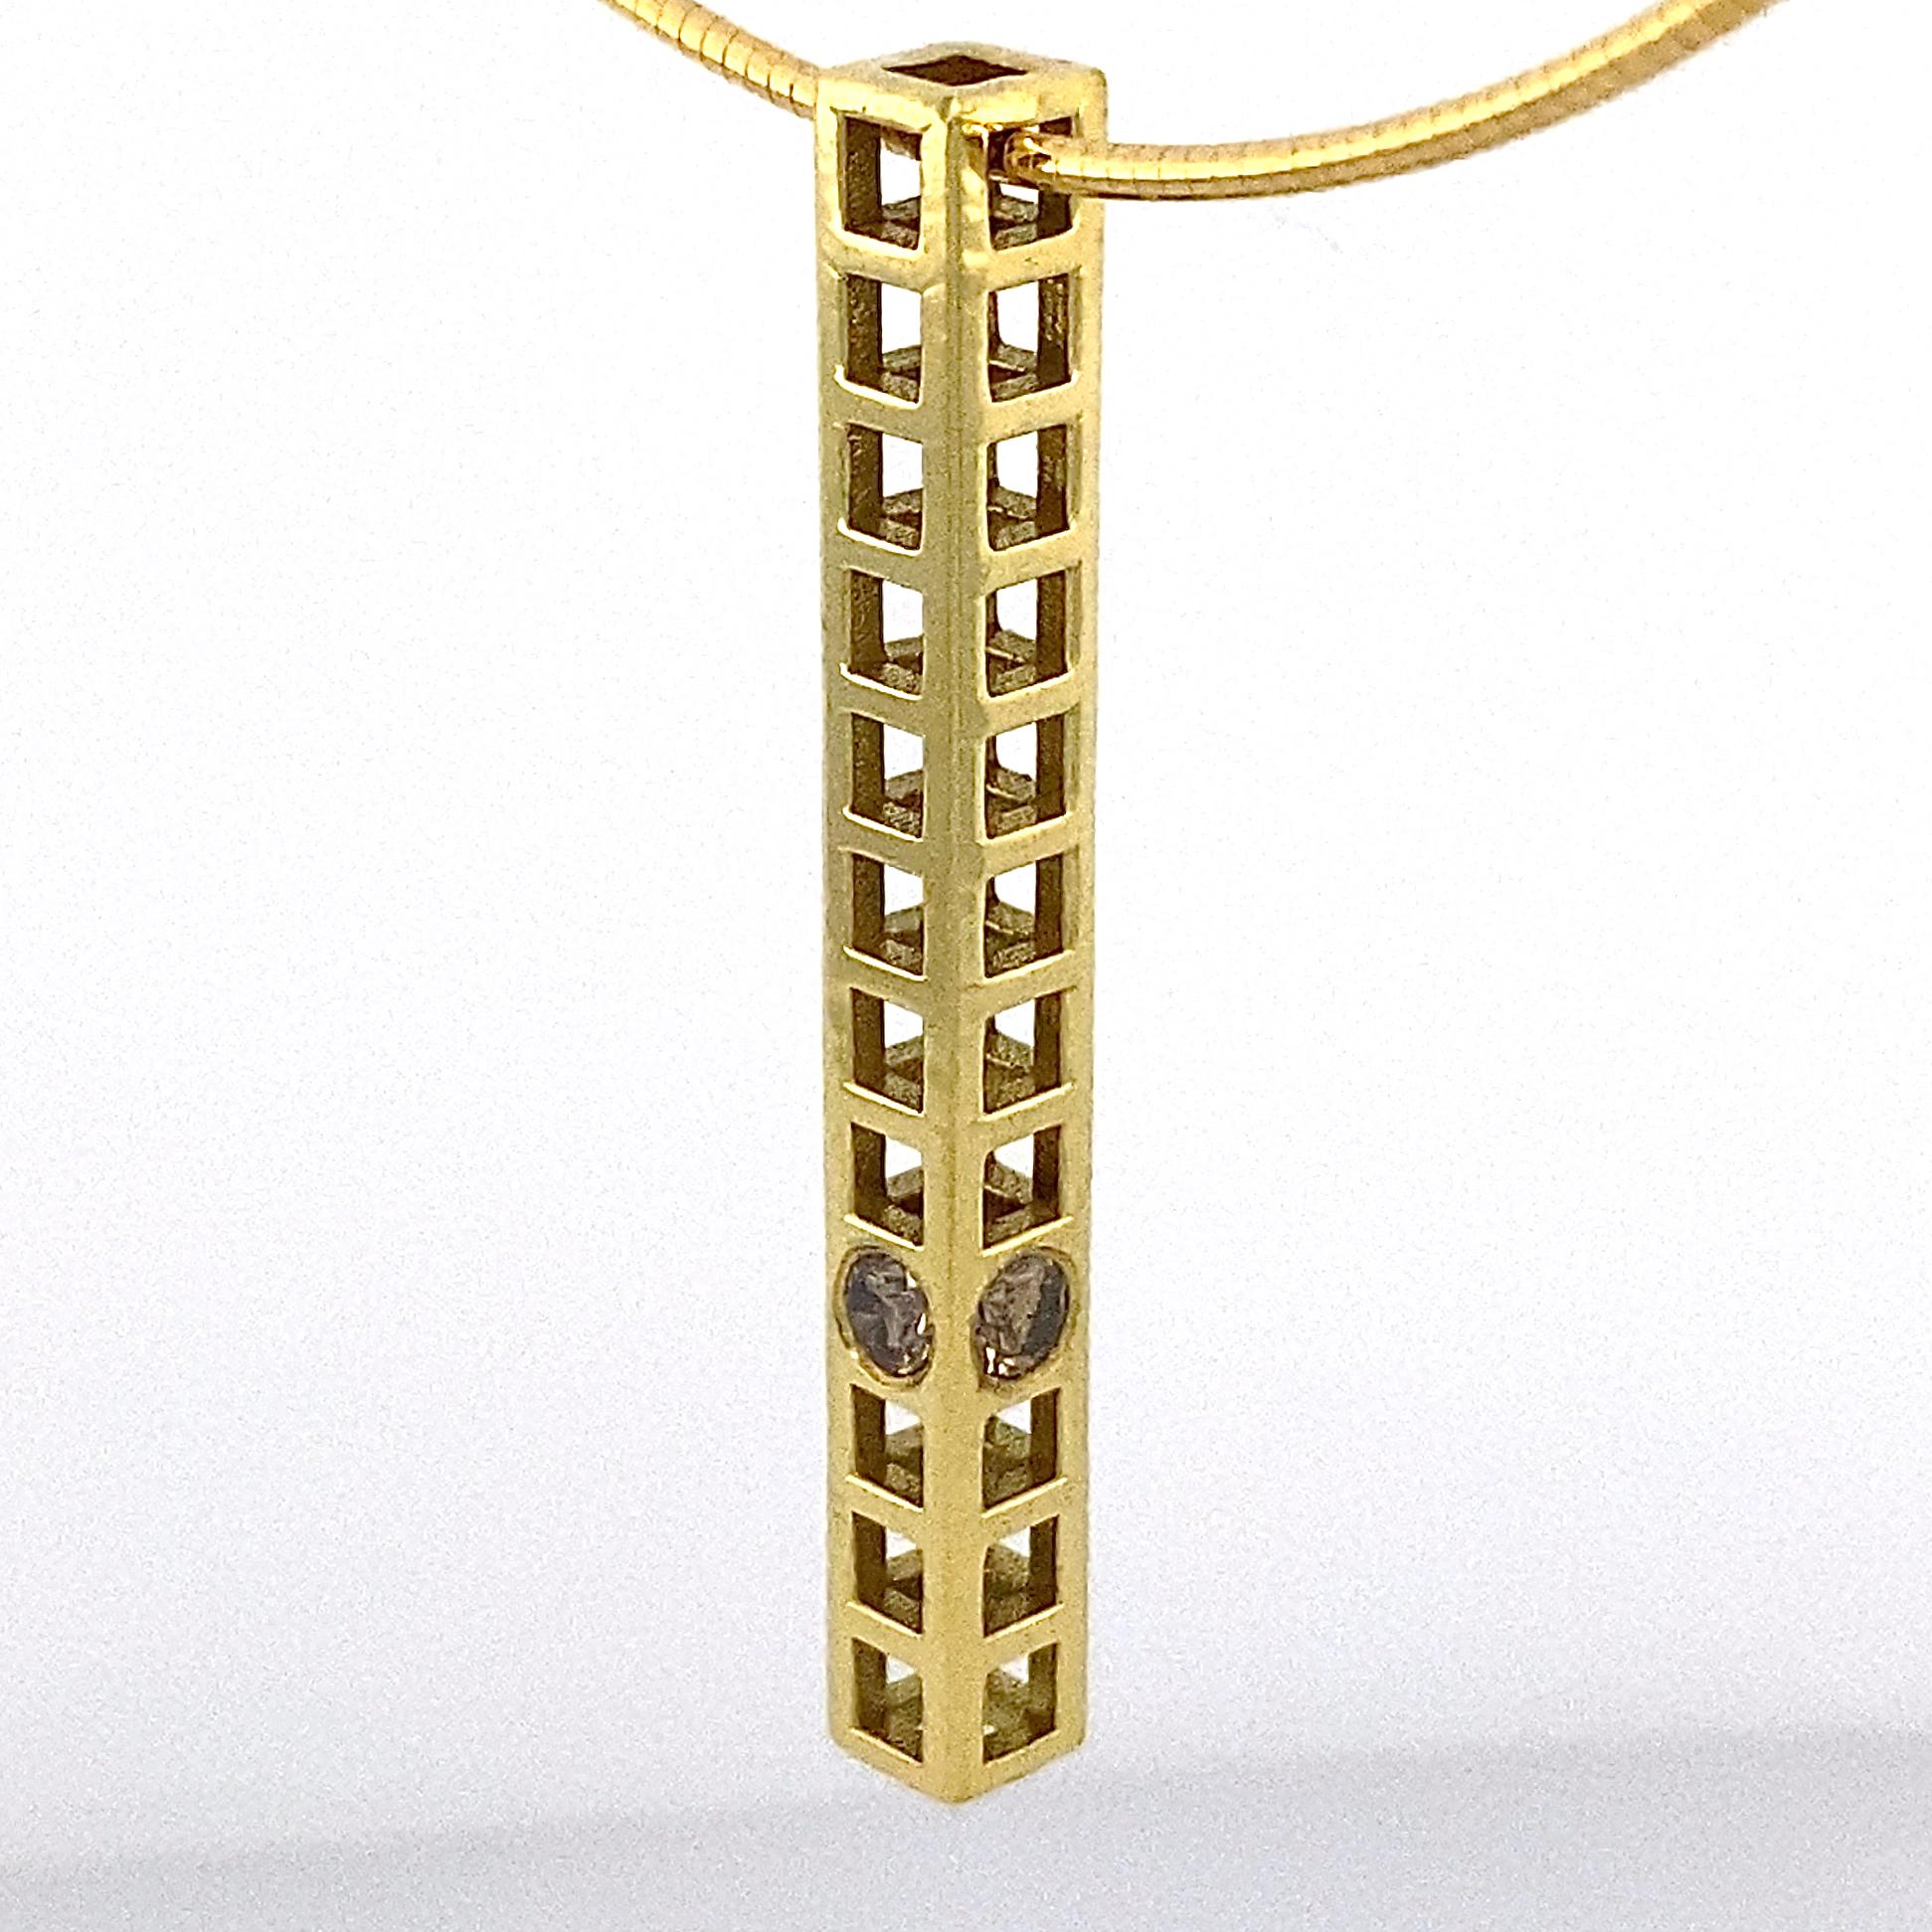 This necklace by Eytan Brandes features a modern, architectural pendant in polished 18 karat yellow gold.  Four earth-mined and untreated light brown, full-cut diamonds are set at the same position on each side.  

The 14 karat gold choker-length